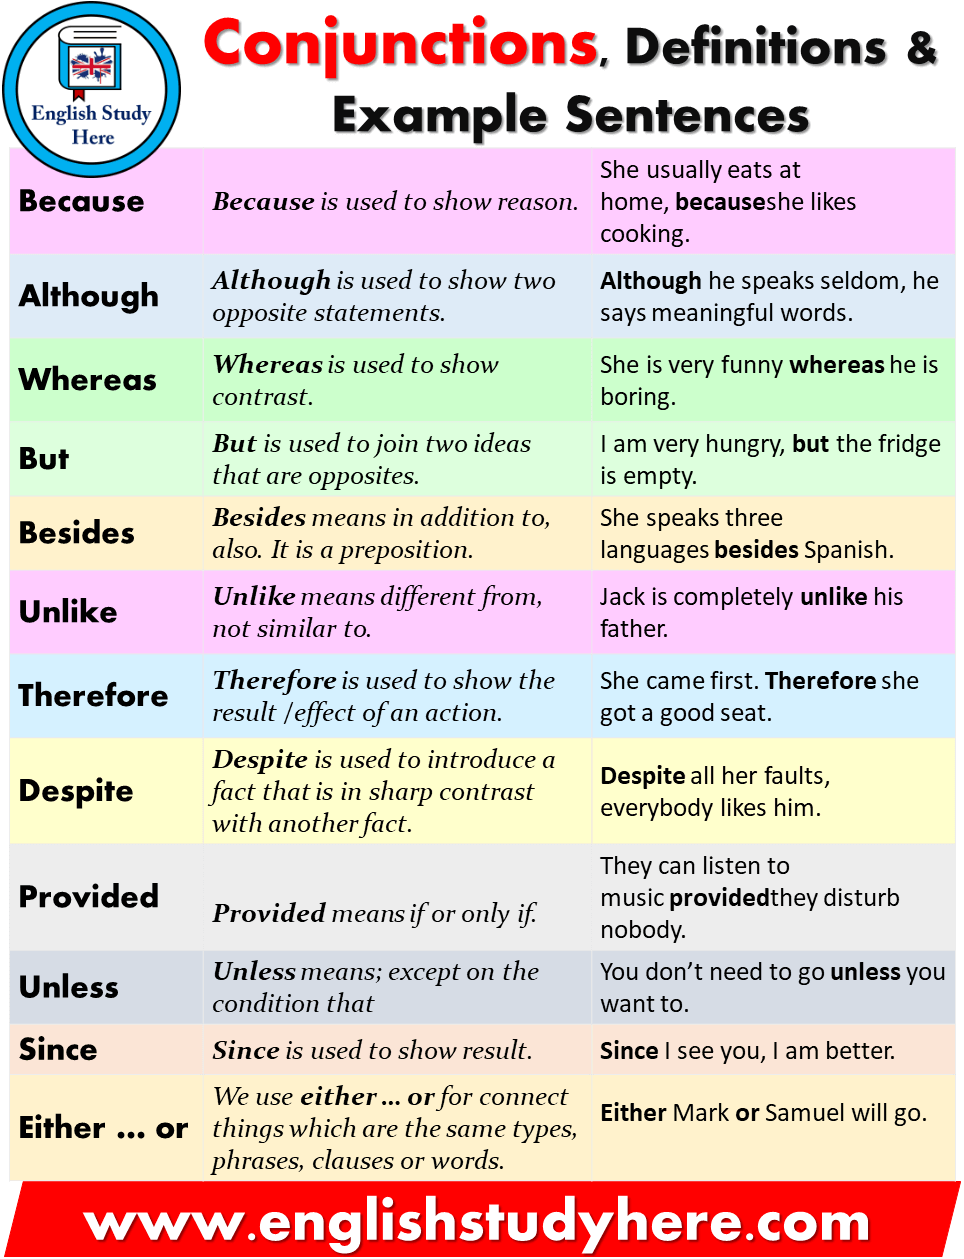 Conjunctions, Definitions & Example Sentences